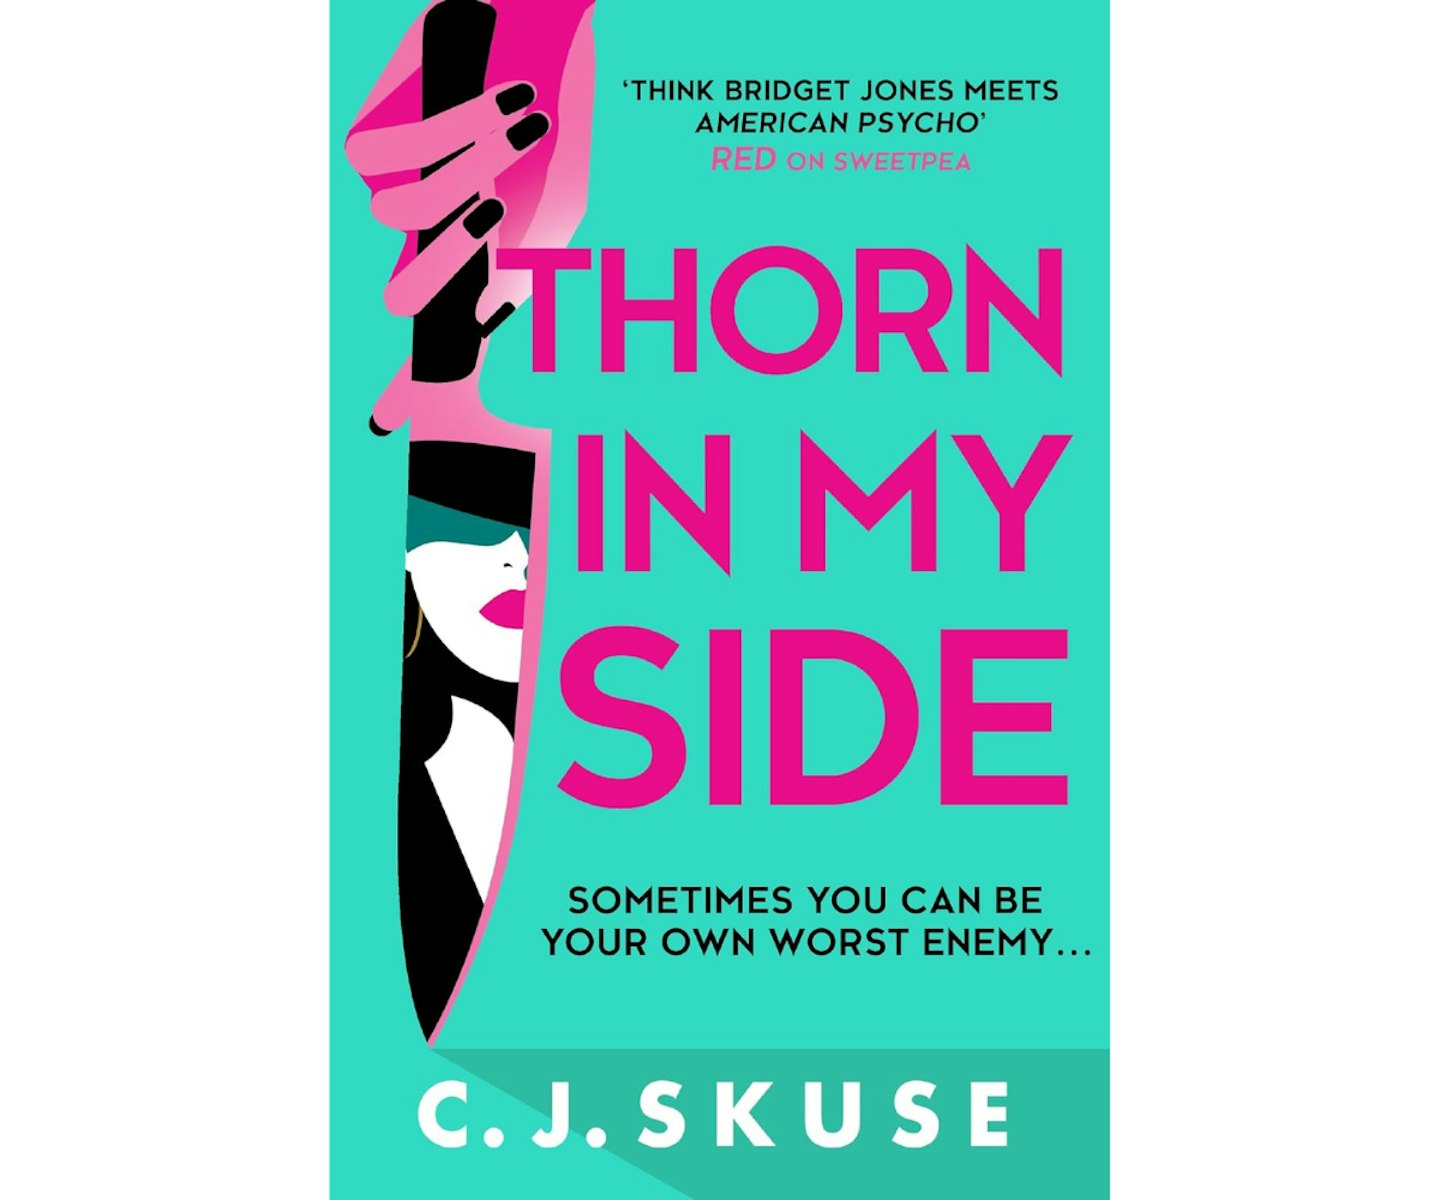 Thorn In My Side by C. J. Skuse